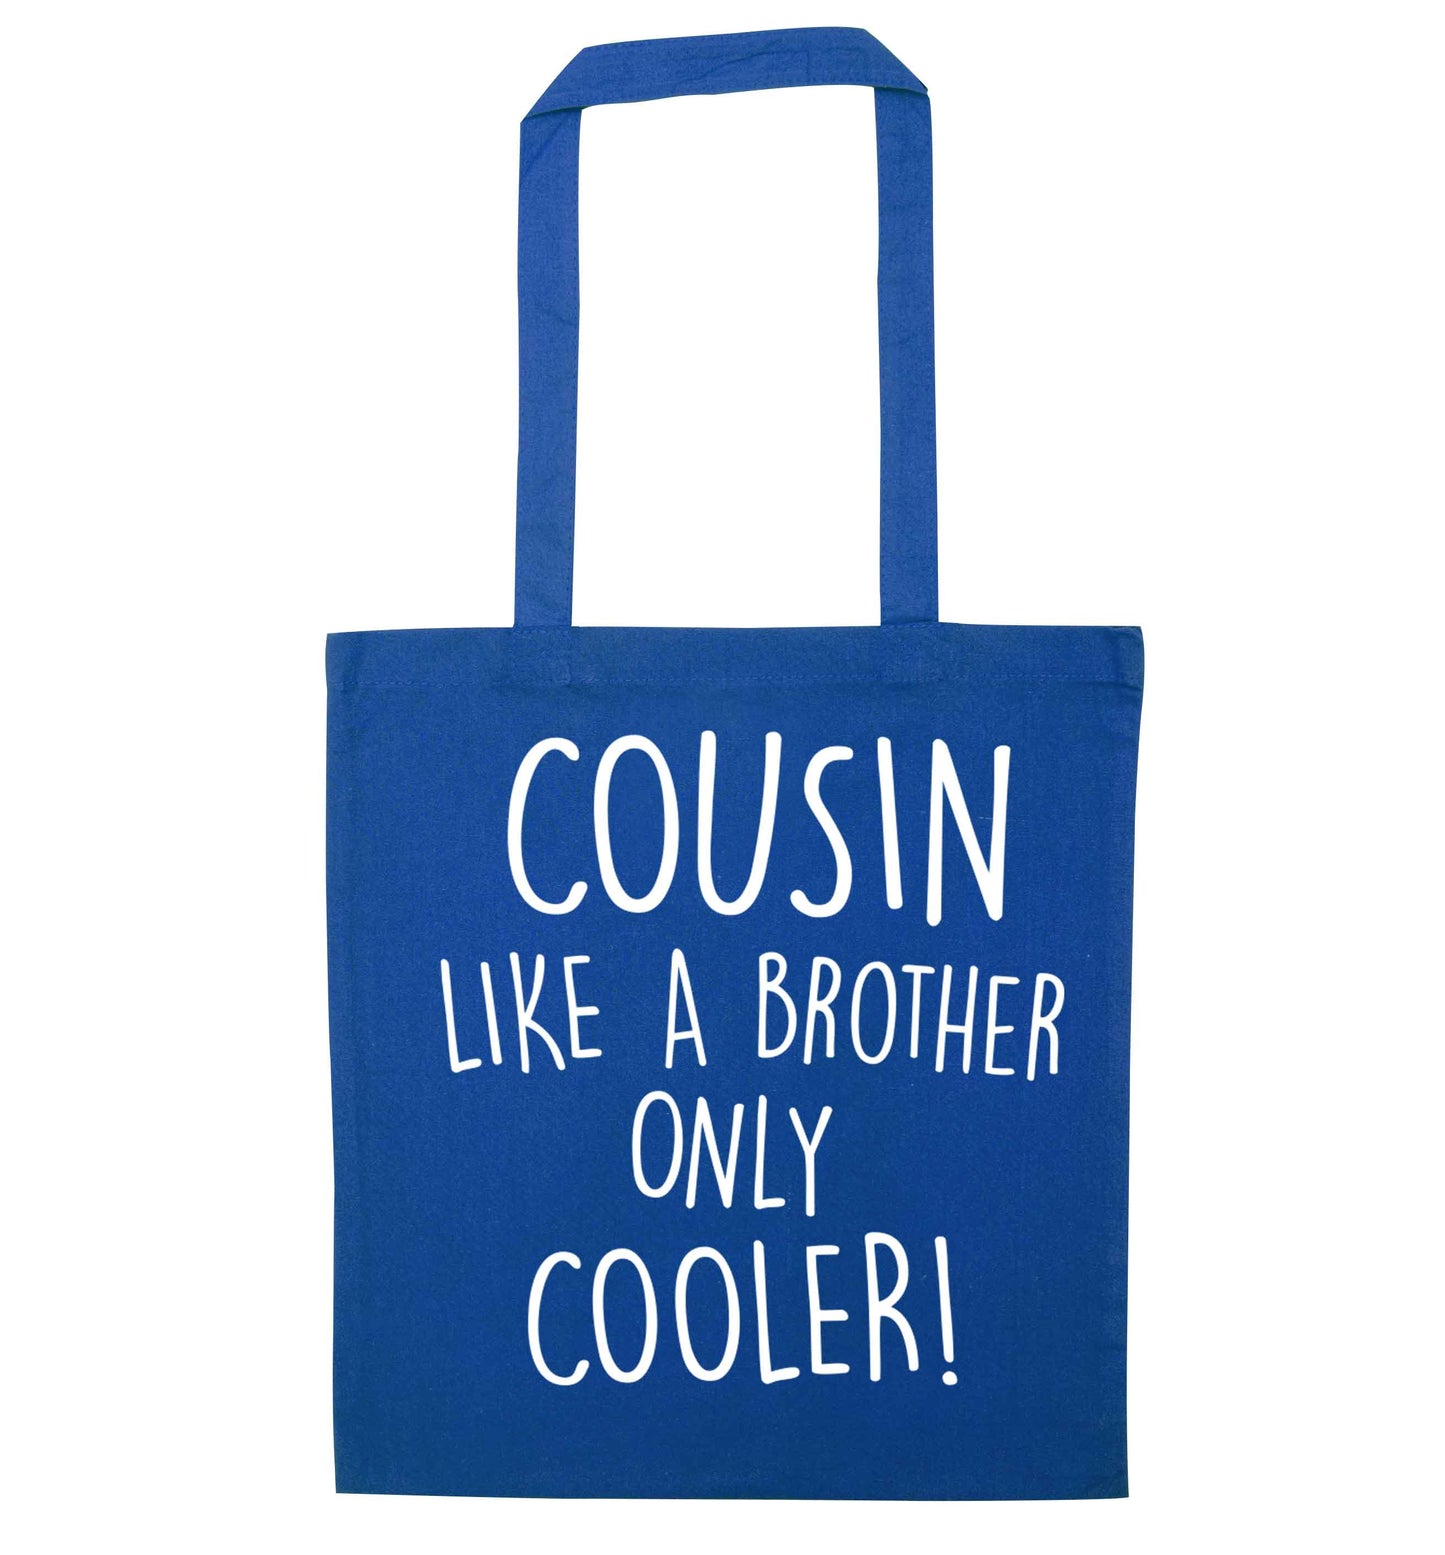 Cousin like a brother only cooler blue tote bag